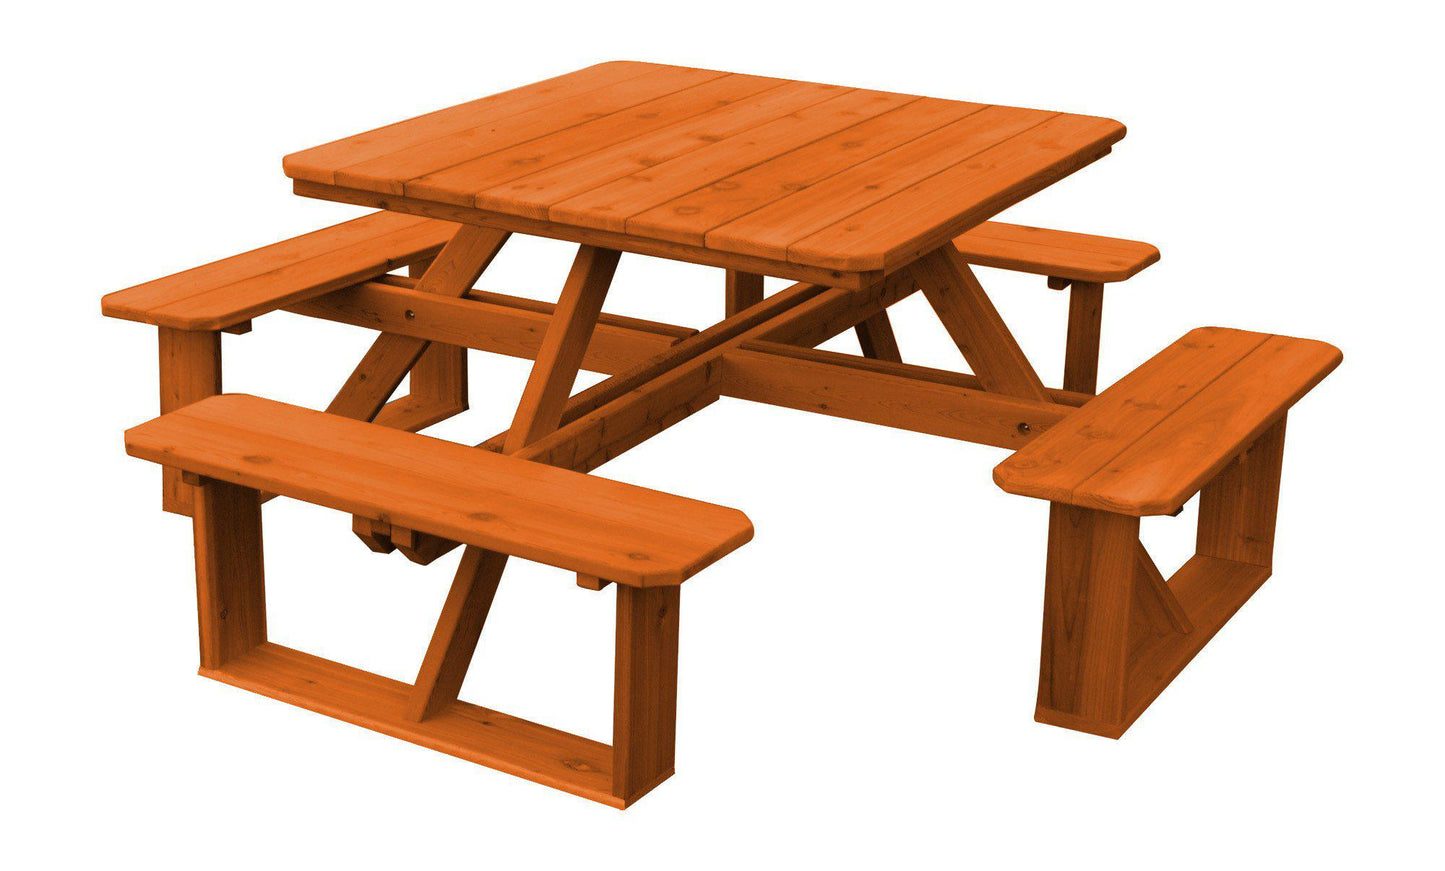 A&L FURNITURE CO. Western Red Cedar 44"  Square Walk-In Table- Specify for FREE 2" Umbrella Hole - LEAD TIME TO SHIP 2 WEEKS